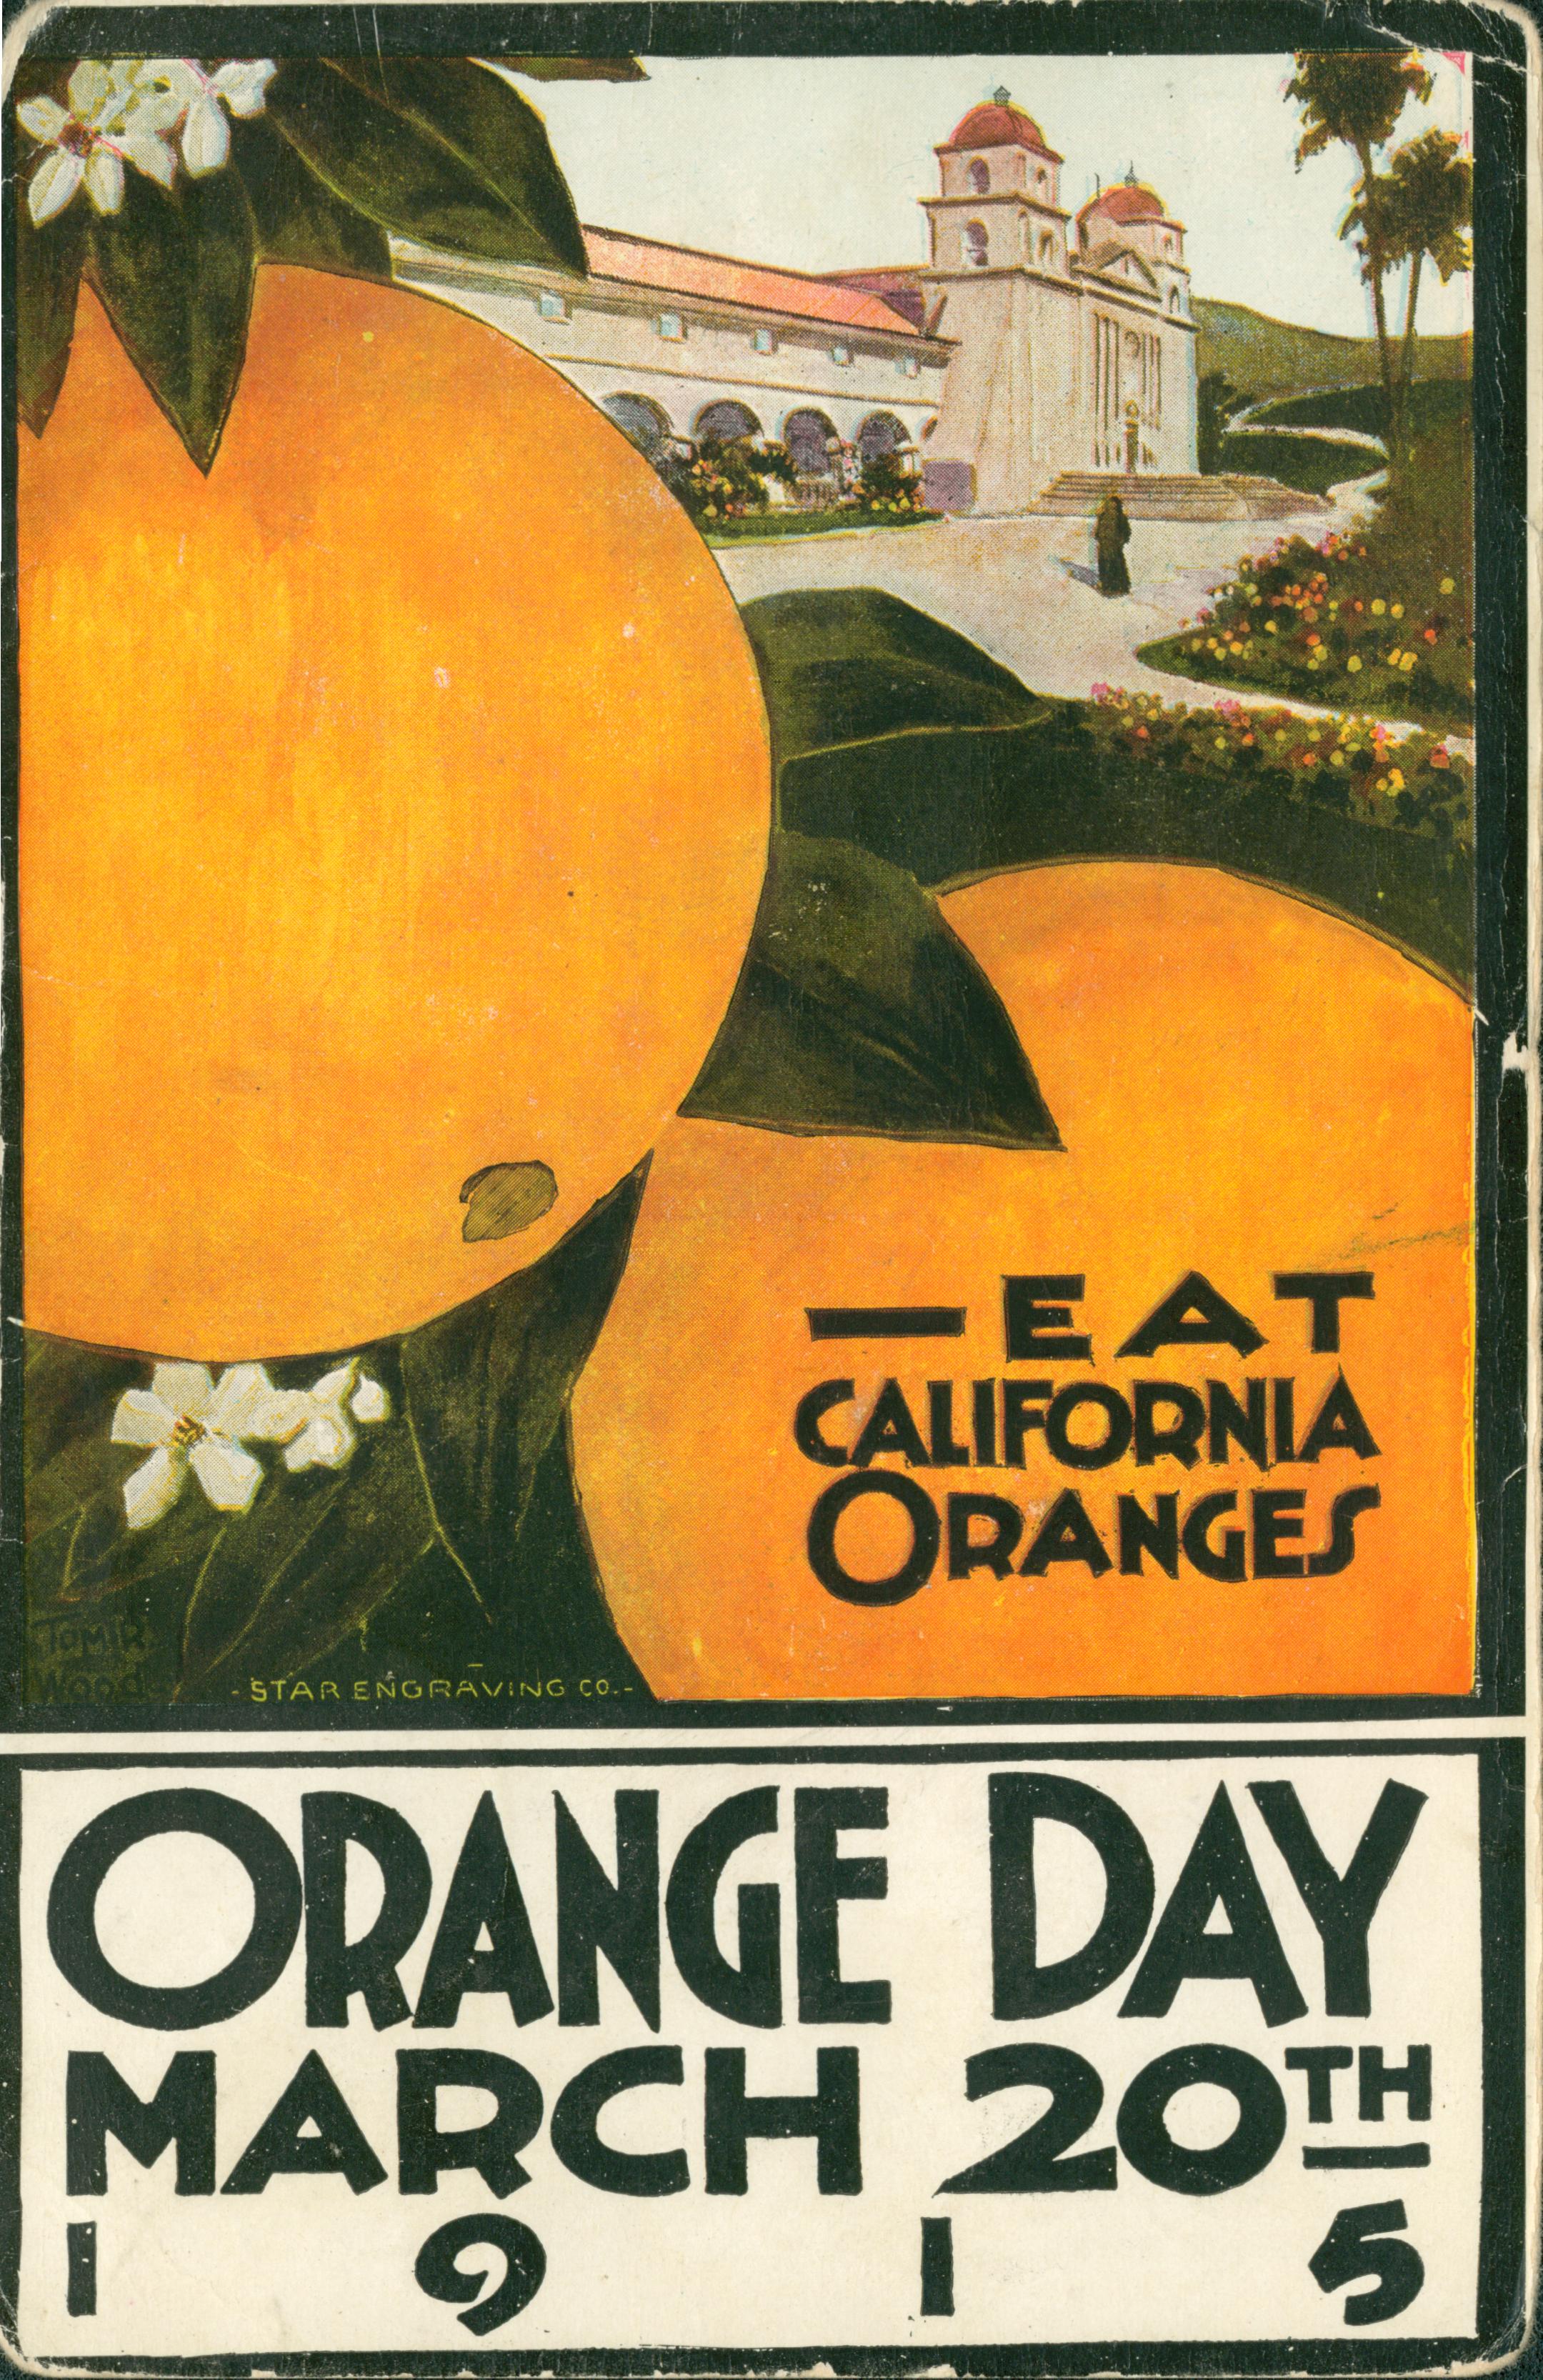 Two large, up-close oranges with leaves and orange flowers, in the background is a large mission-like building with hills, flowers, trees in the background